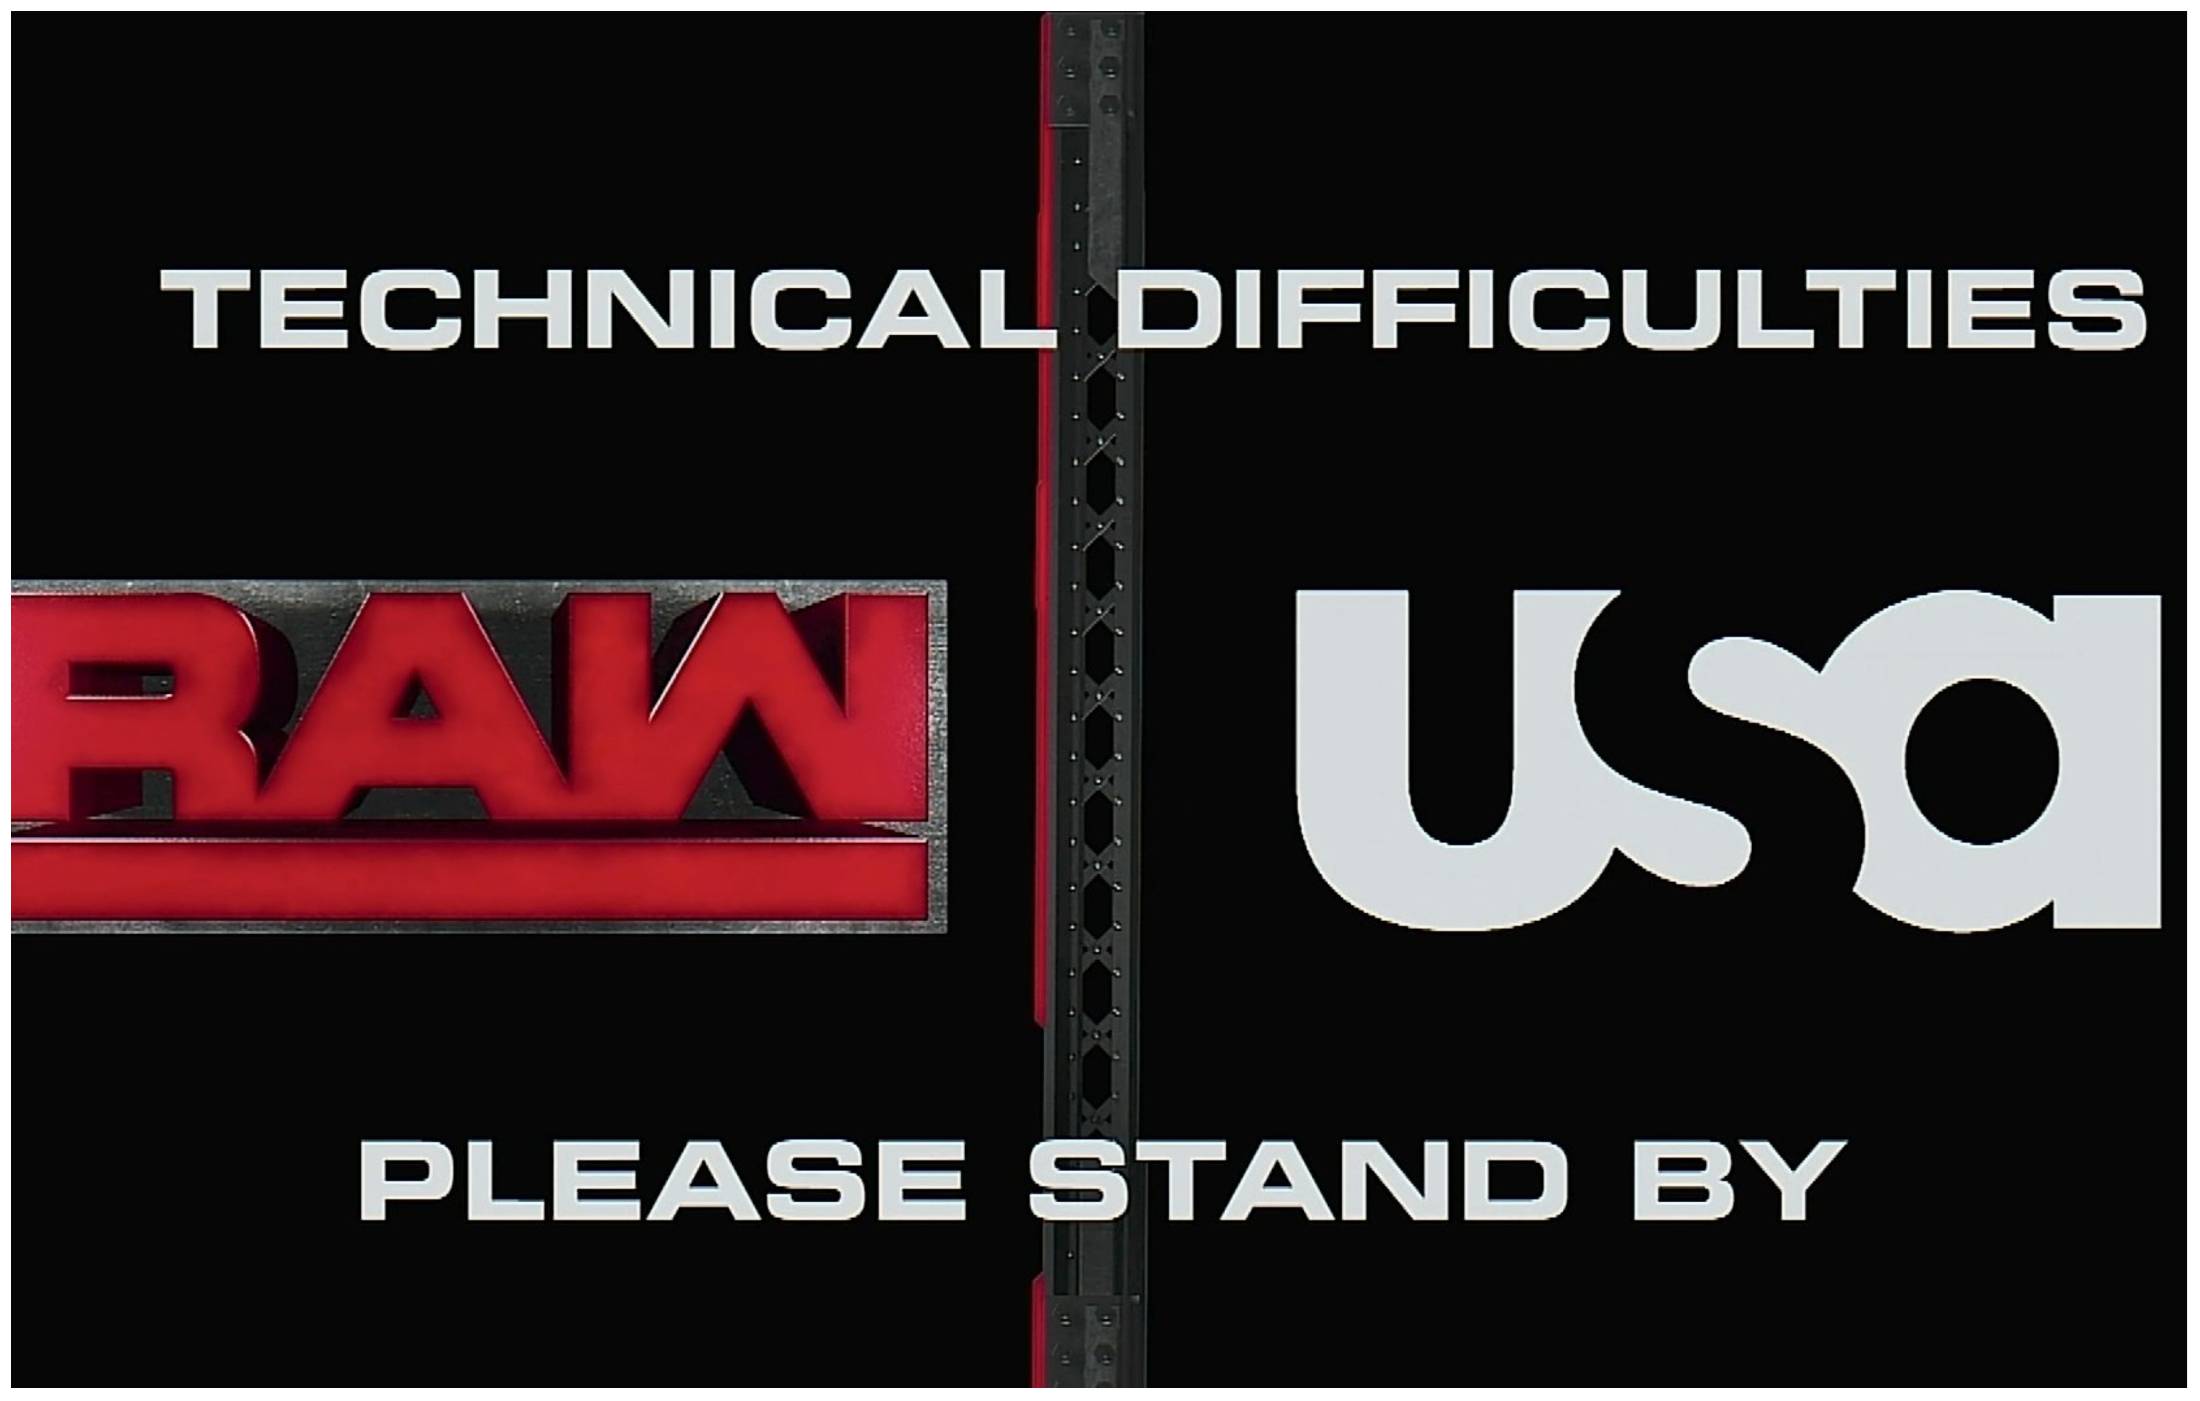 Technical issues during WWE Raw last night